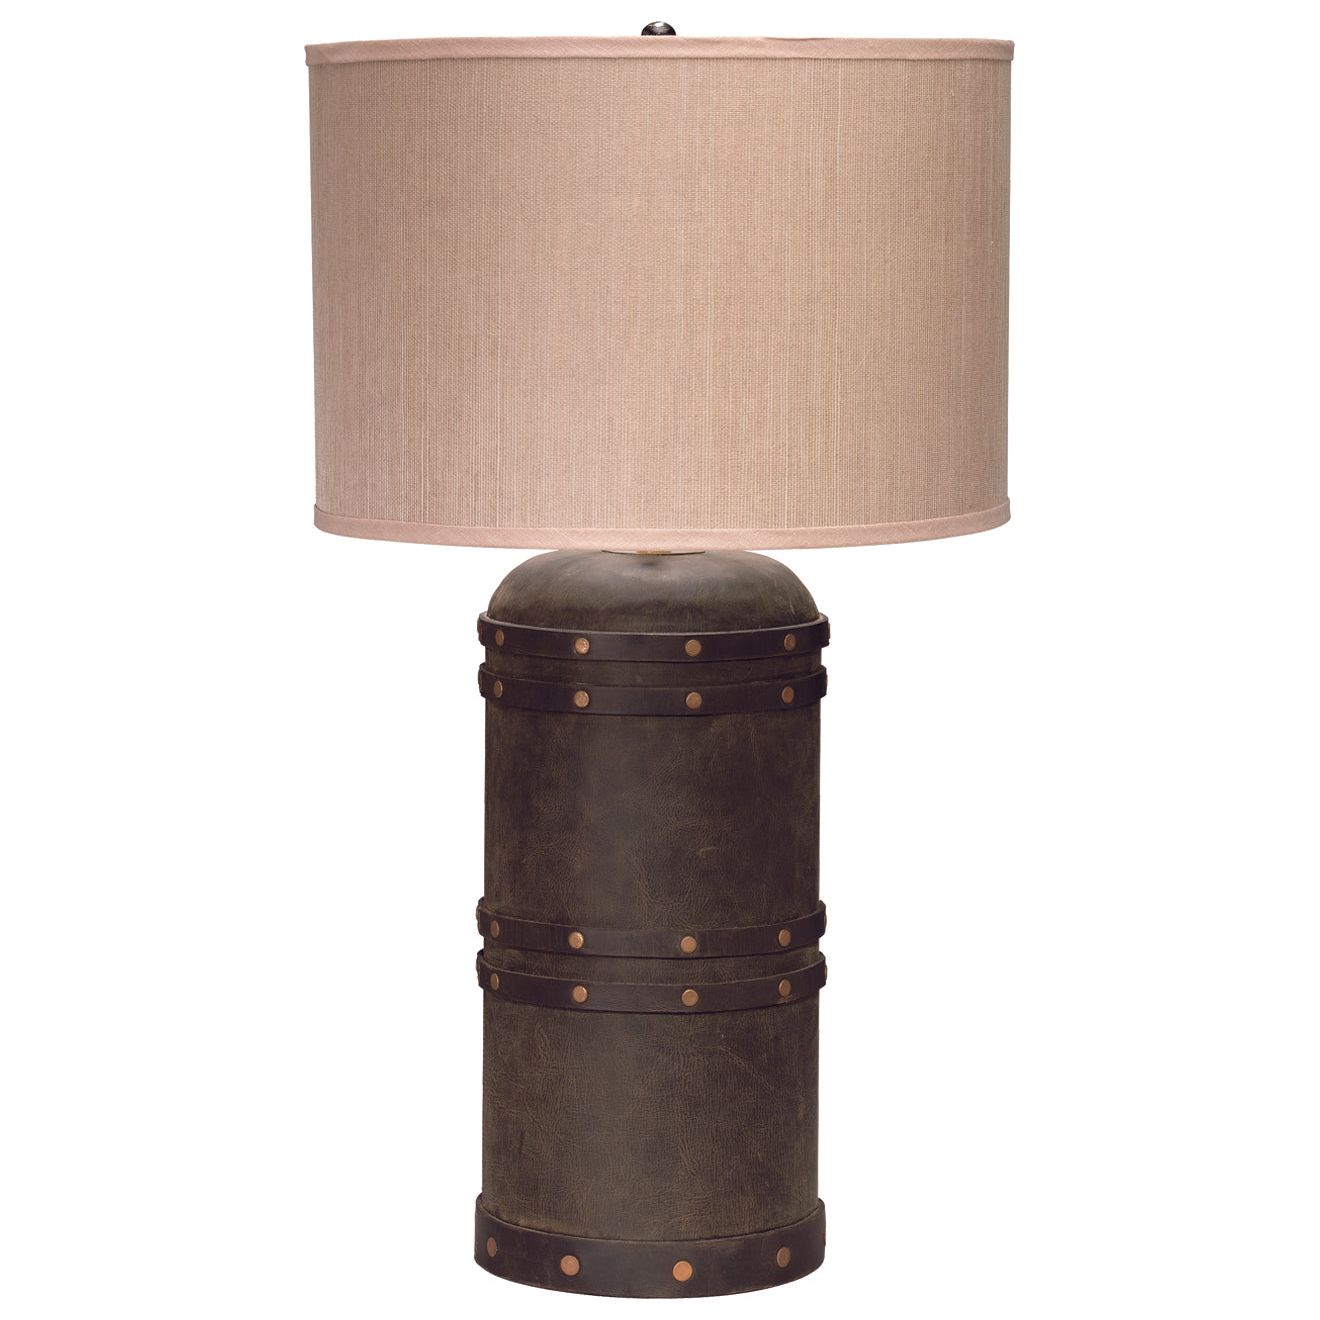 Jamie Young Company - 1BARR-TLLE - Barrel Table Lamp - Barrel - Brown